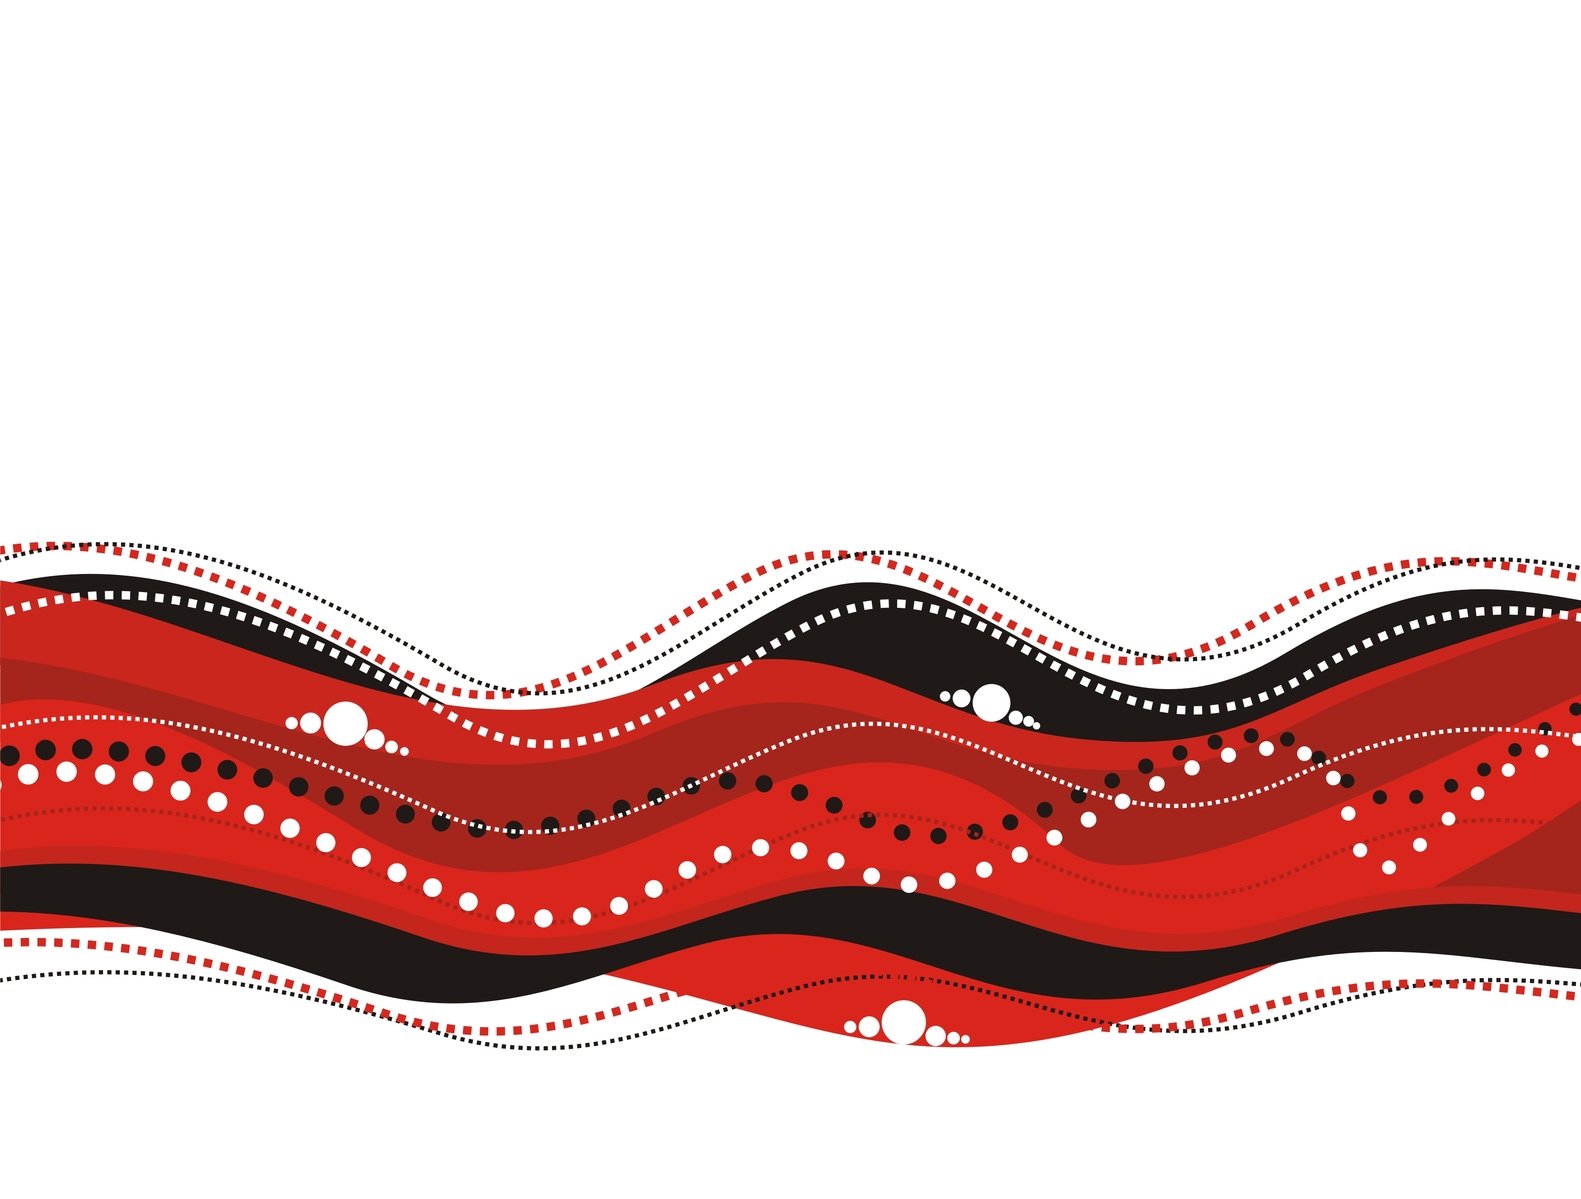 an illustration of waves with a red background